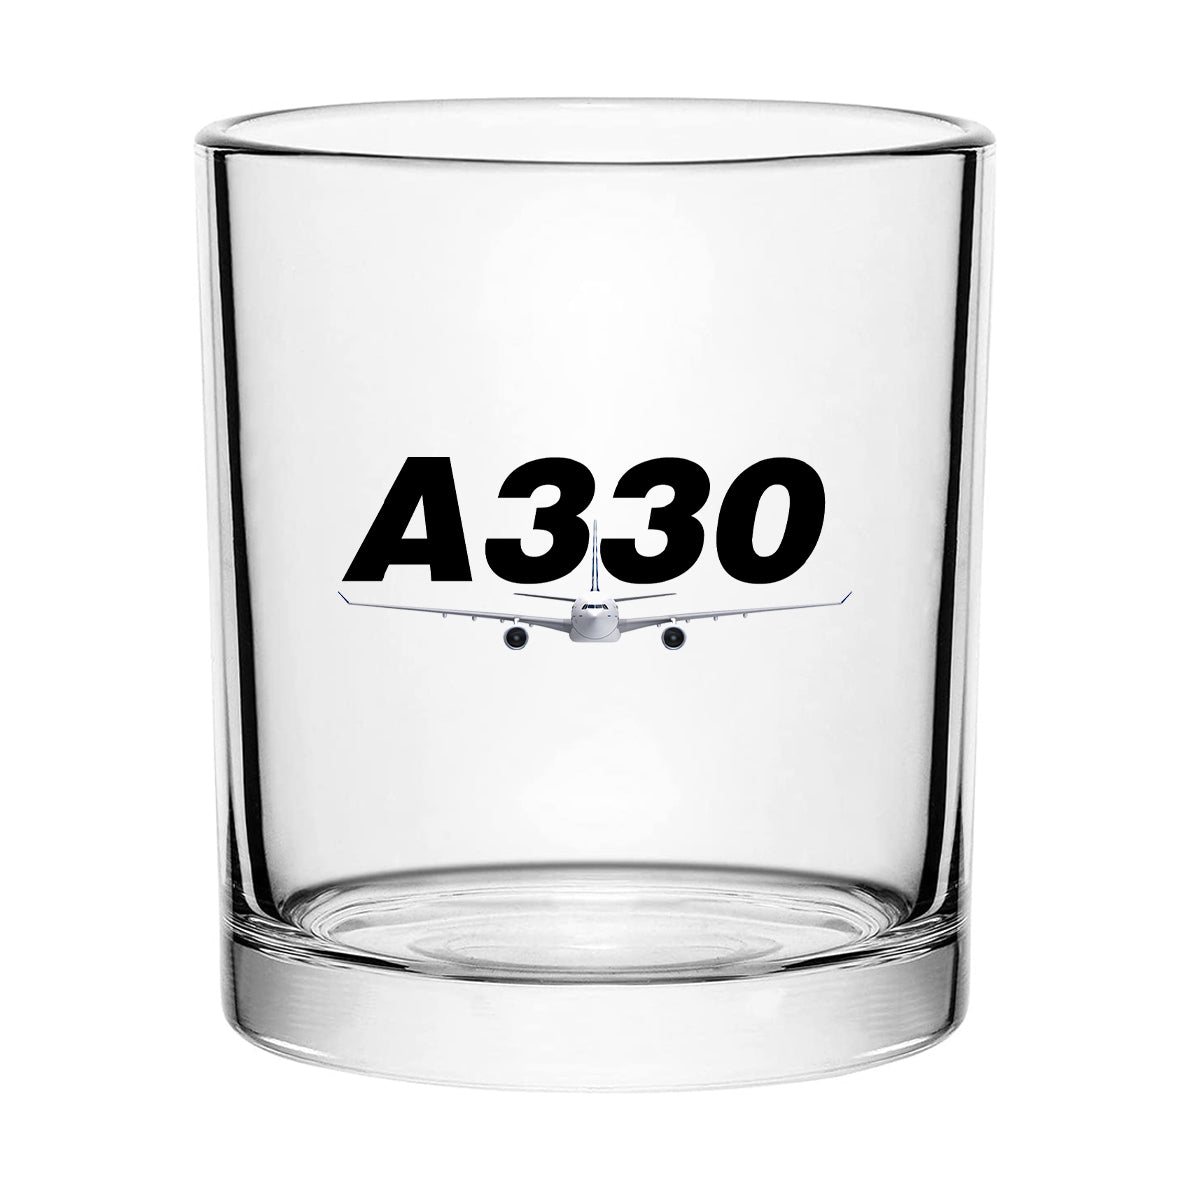 Super Airbus A330 Designed Special Whiskey Glasses